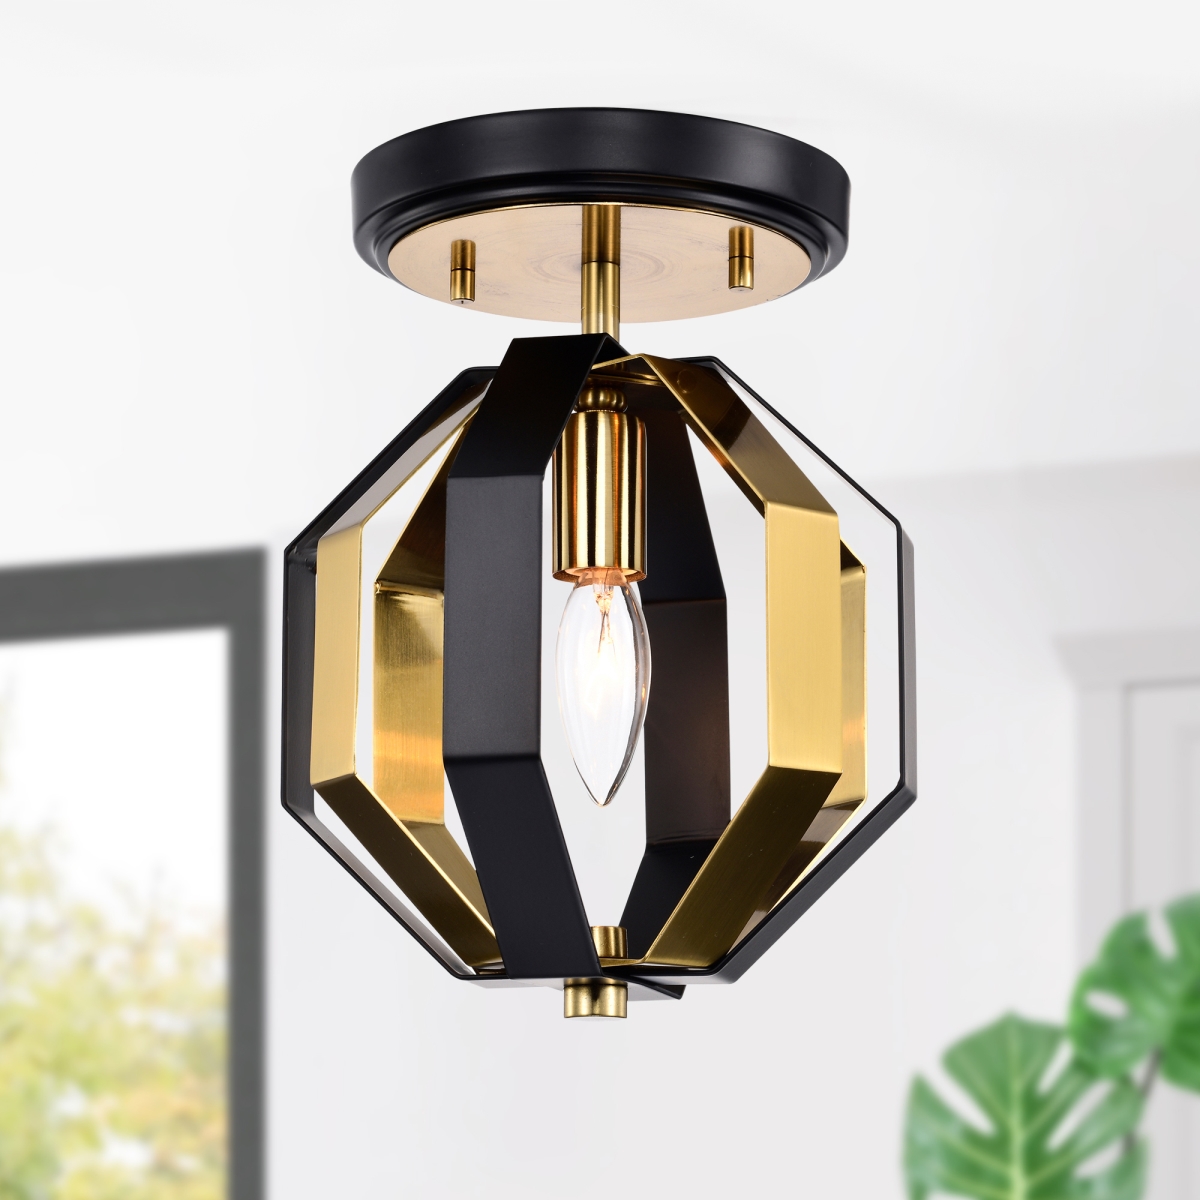 Felicia 8 in. 1-Light Indoor Matte Black and Gold Finish Semi-Flush Mount Ceiling Light with Light Kit and Remote